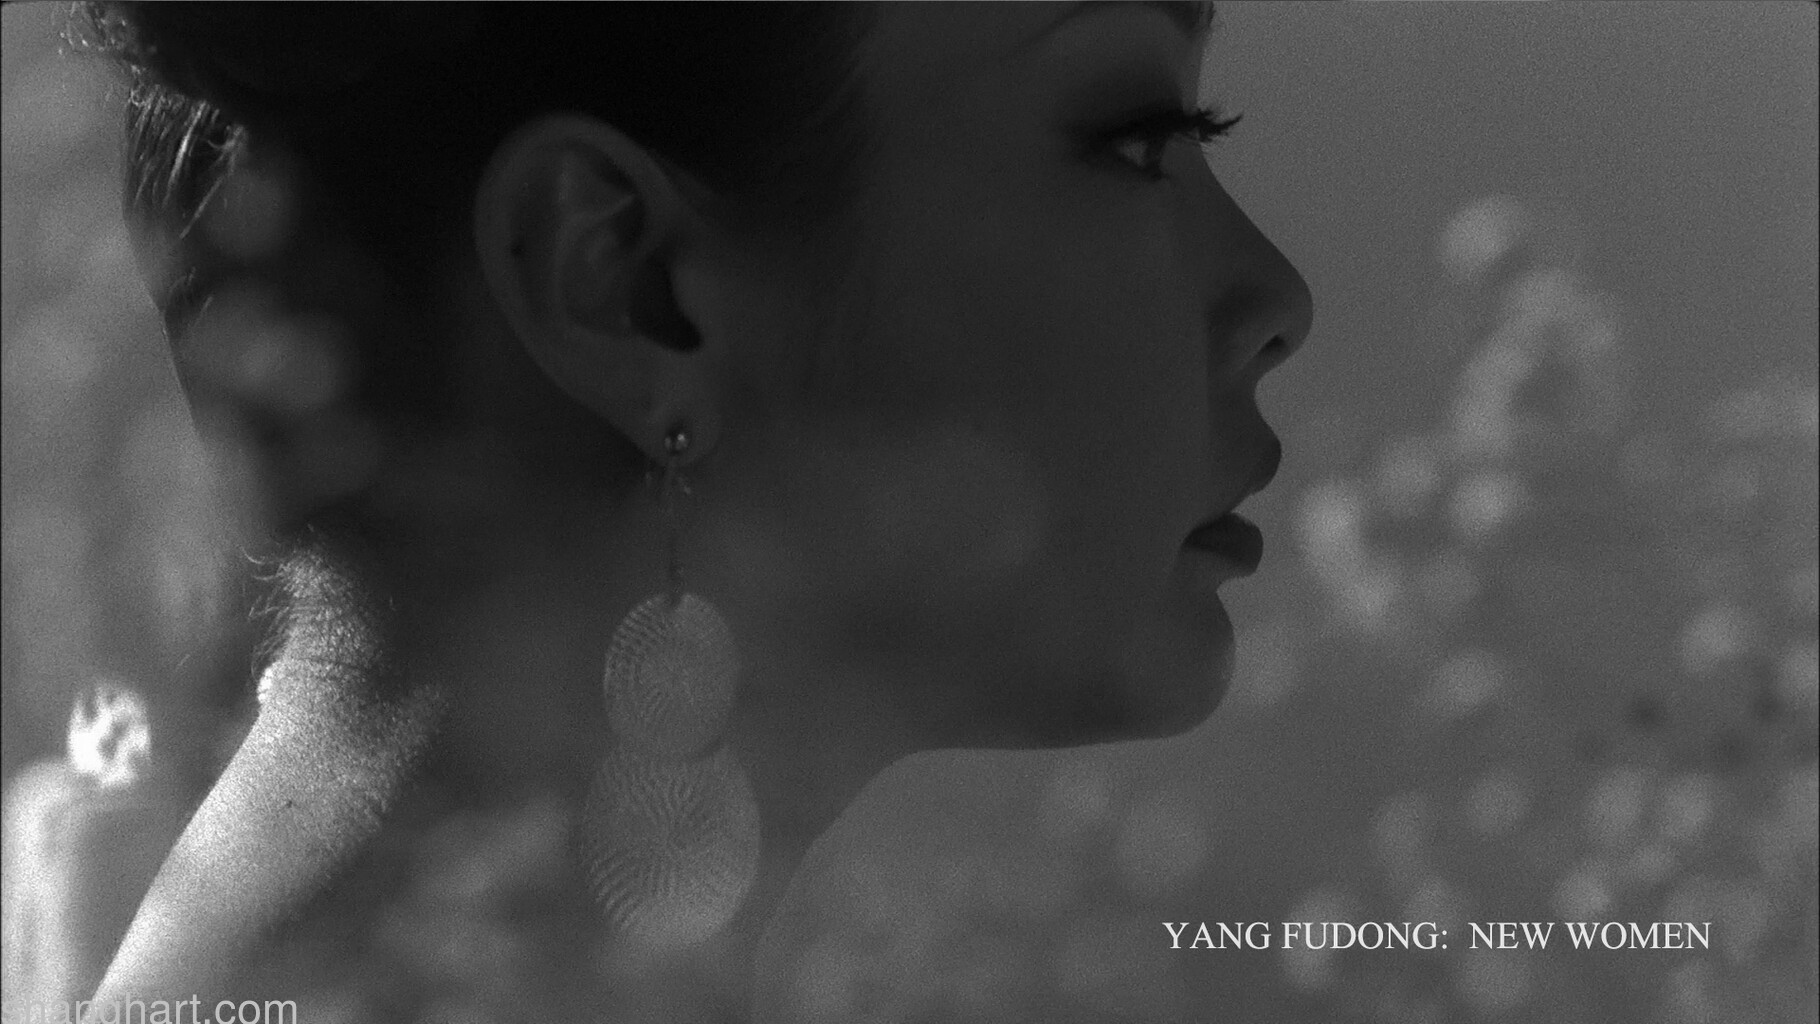 Yang Fudong, New Woman, 5-channel video installation, still image